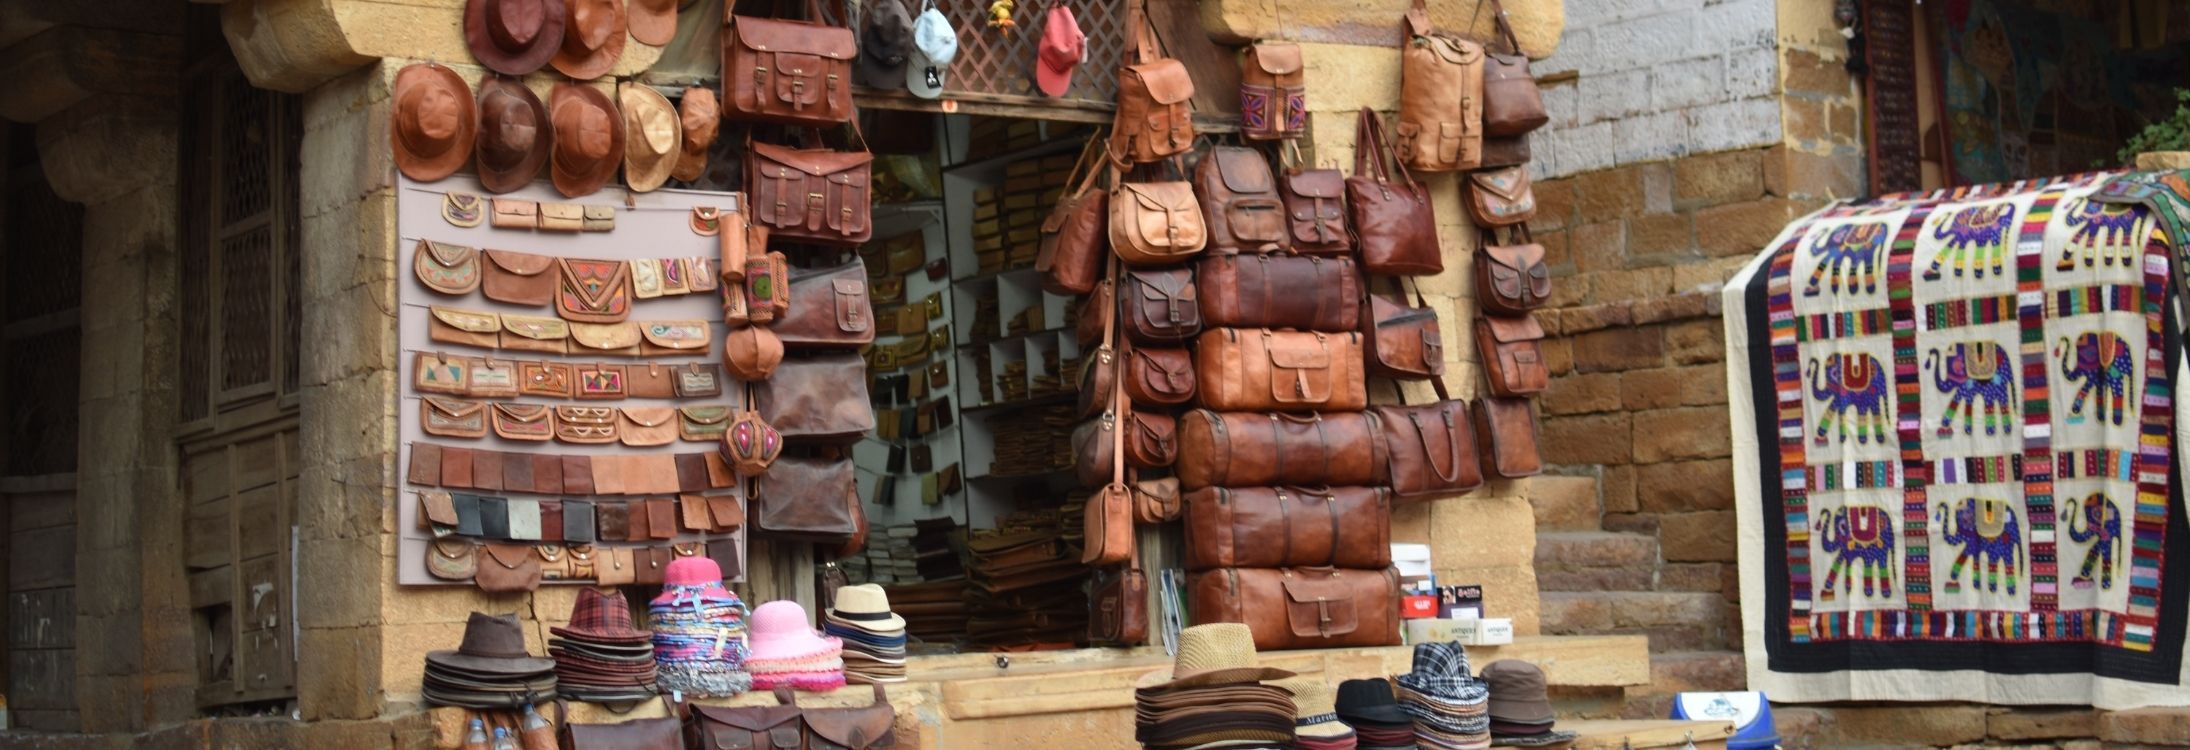 Handicrafts From Across India, Hand-made With Love!